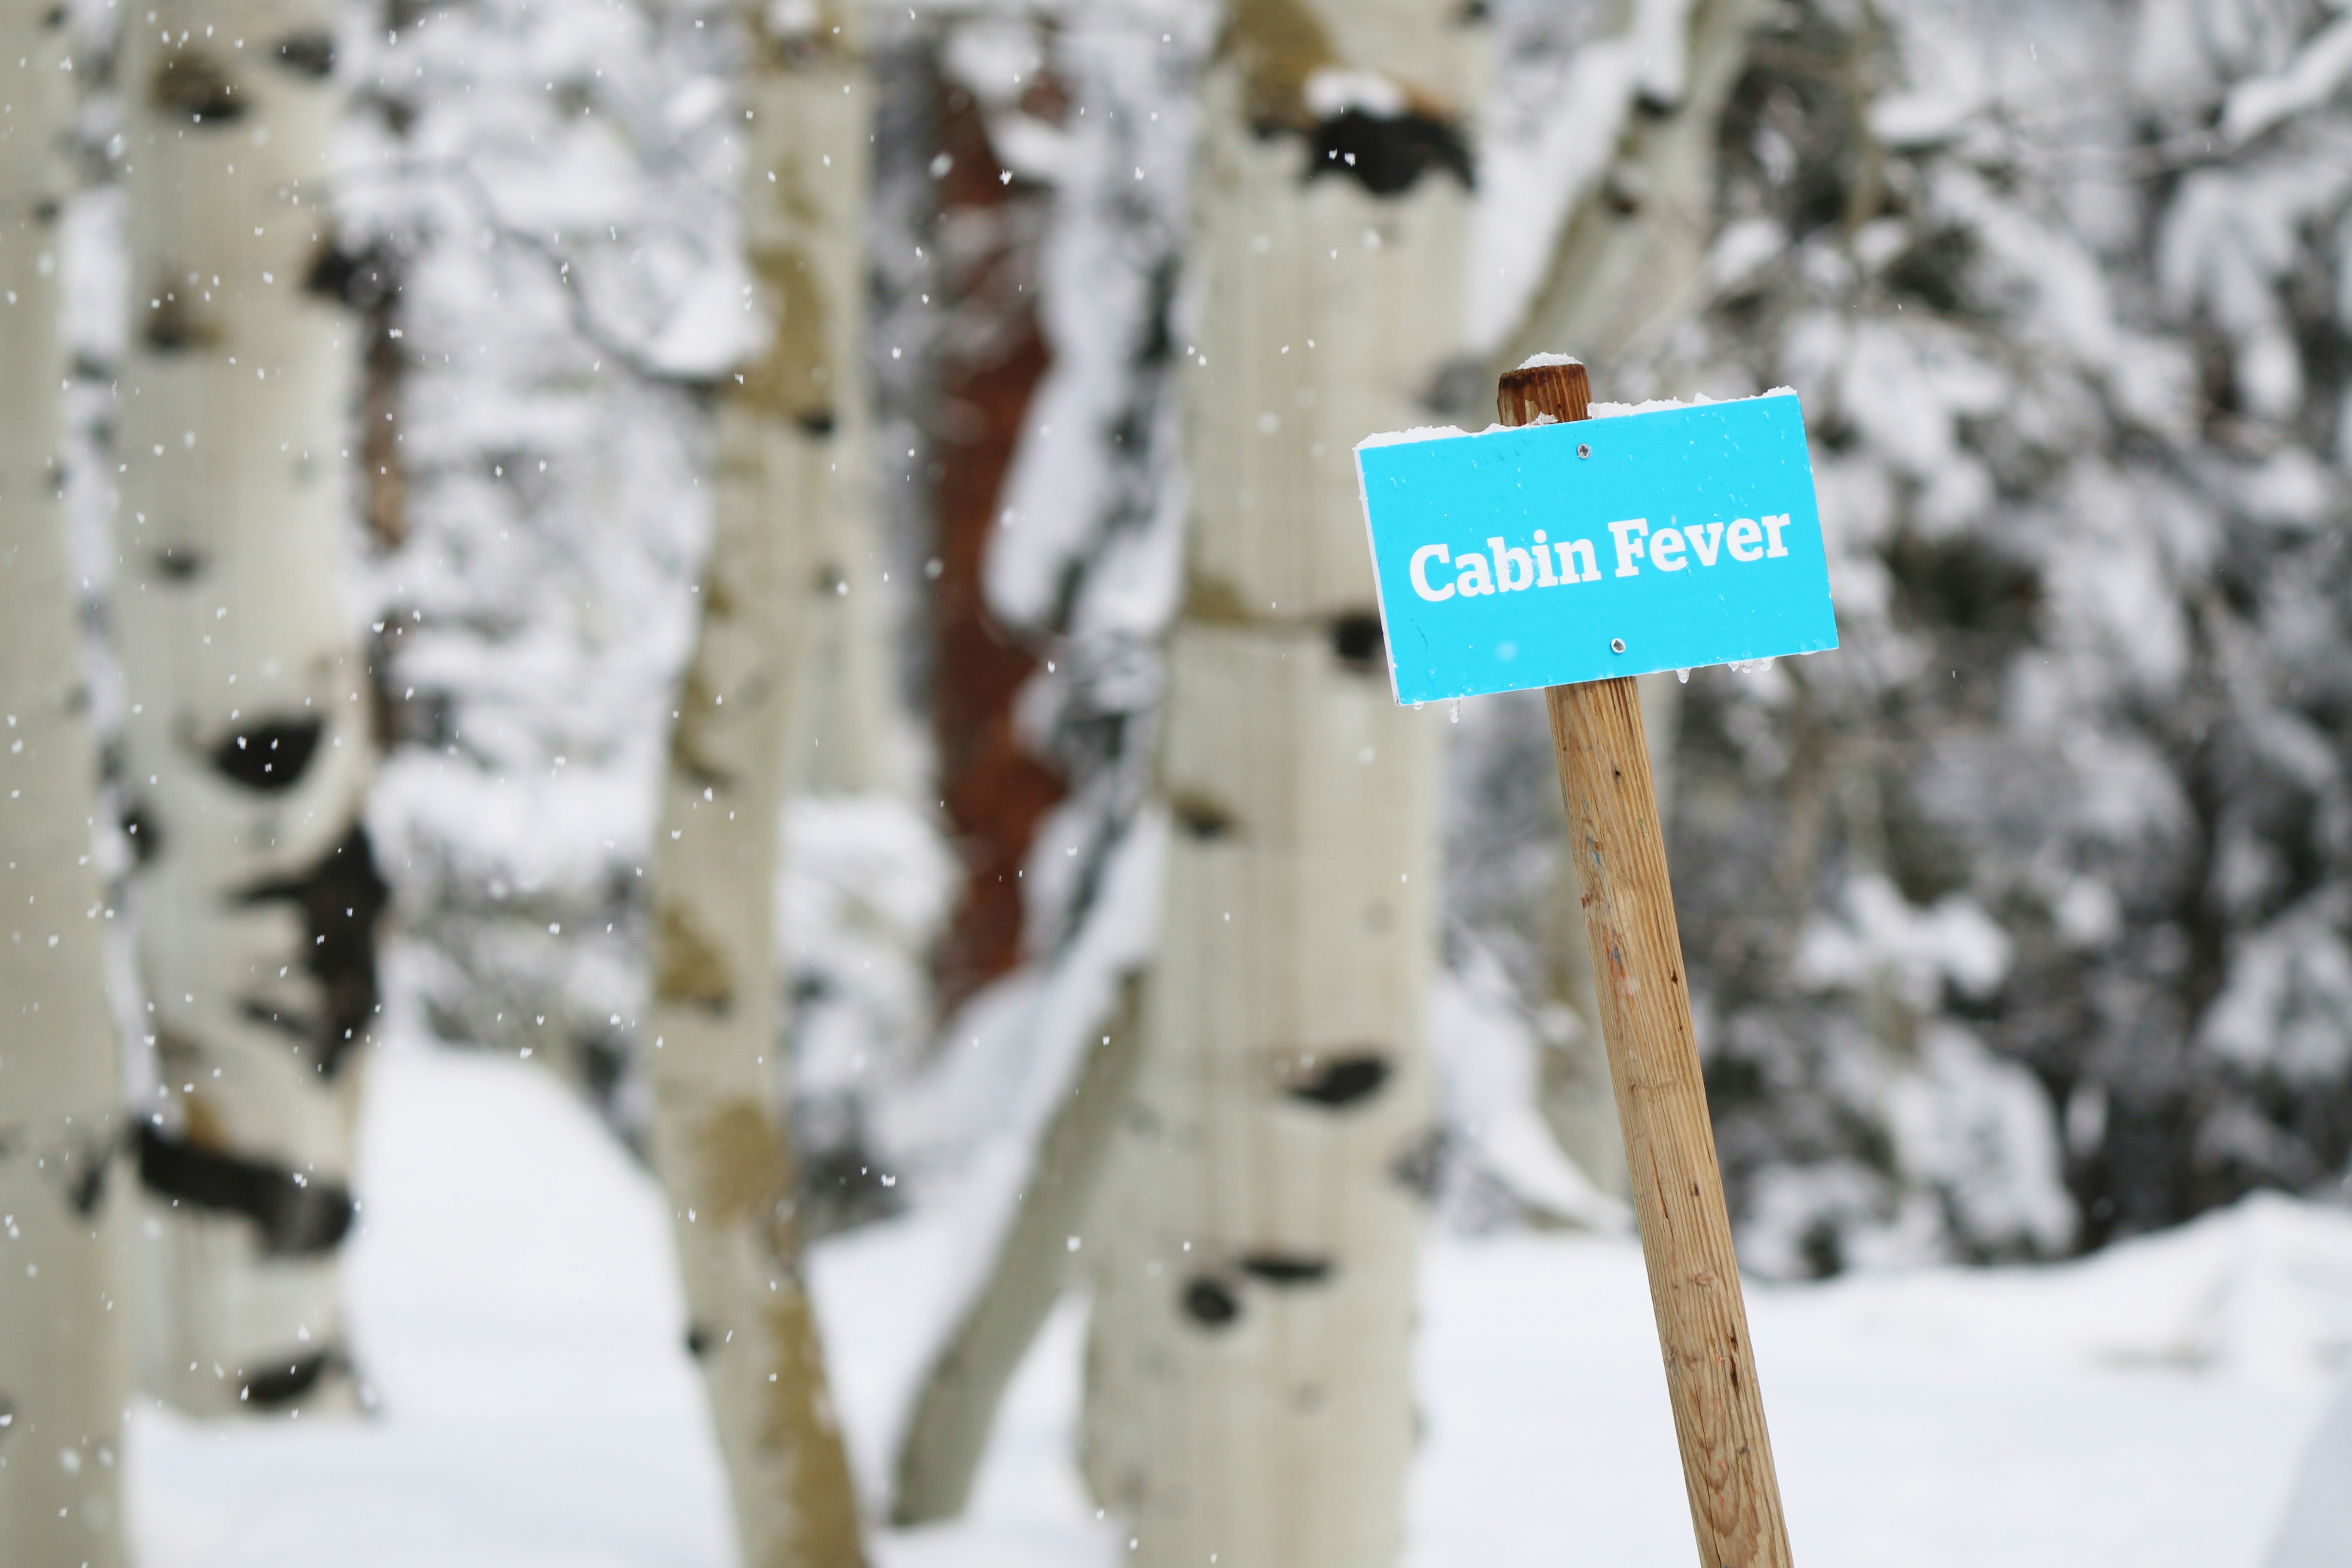 While snowshoeing through the Utah mountains, we hiked through a small village of cabins, many of which had paths with signs on them. With the falling snow and the icicles on the sign, this image seemed to capture the mood pretty well.